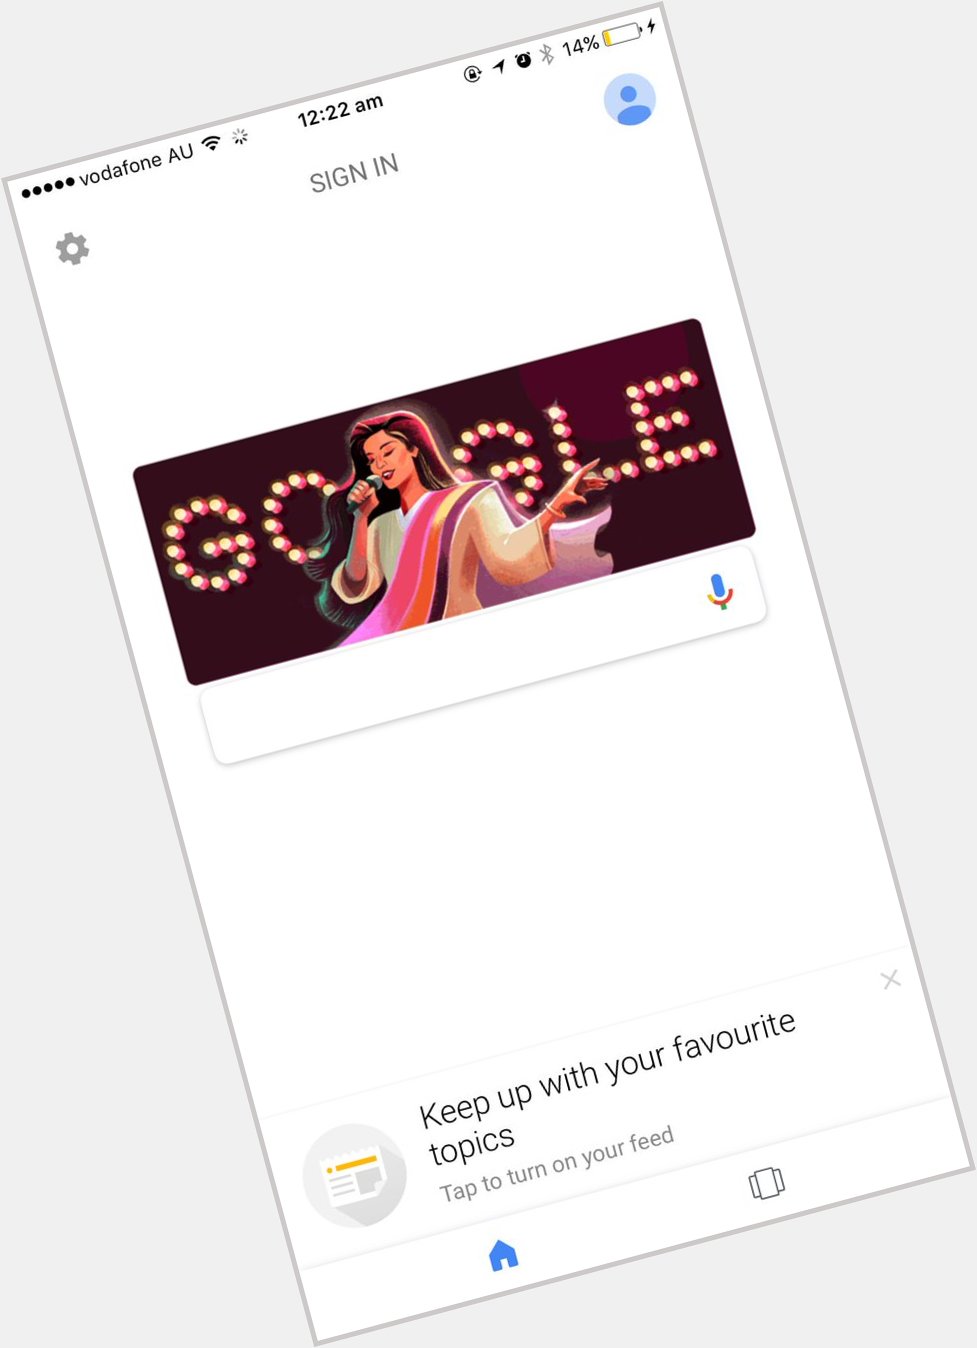 Made me happy to see Google paying tribute to Nazia Hassan for her birthday 